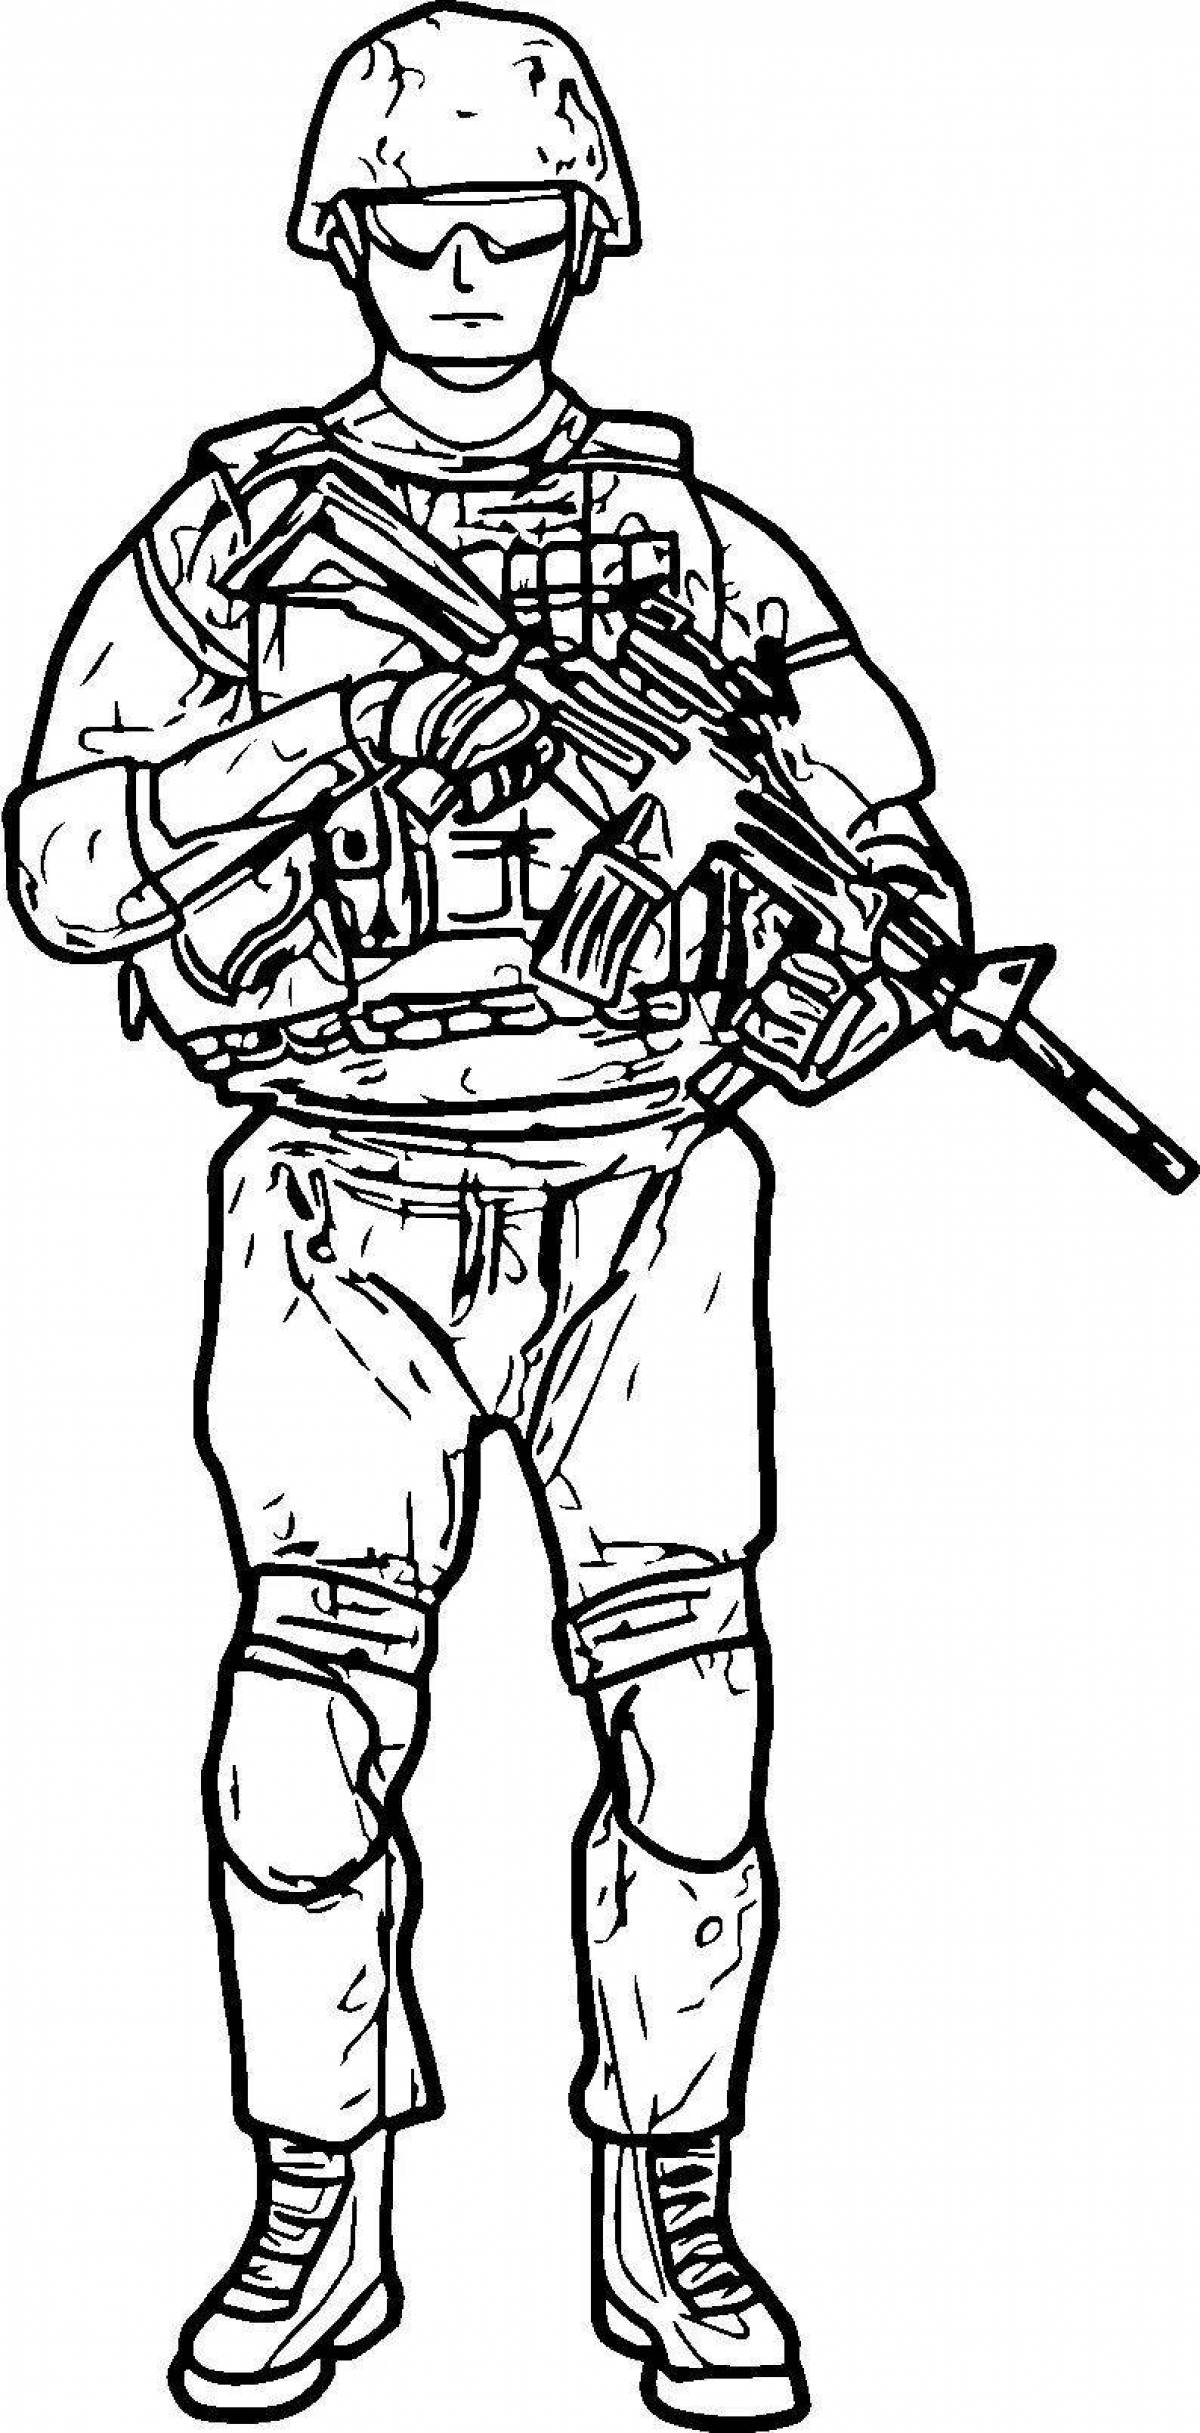 Large military uniform coloring book